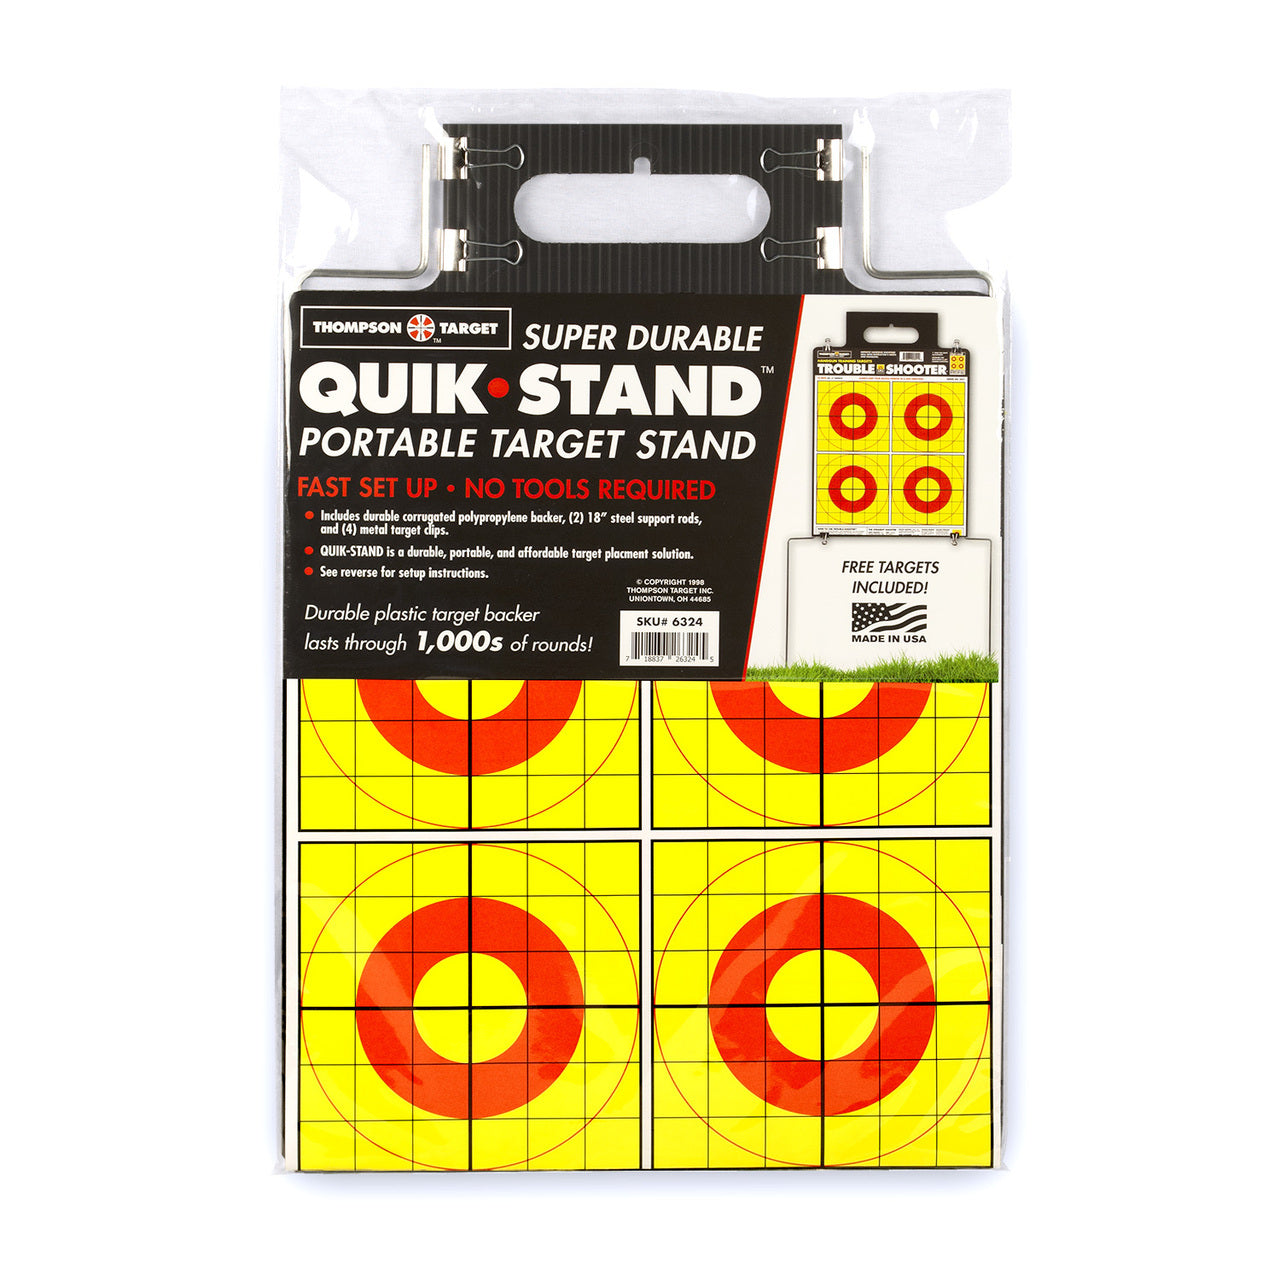 Quik-Stand Target Stand - Portable Re-Usable Durable